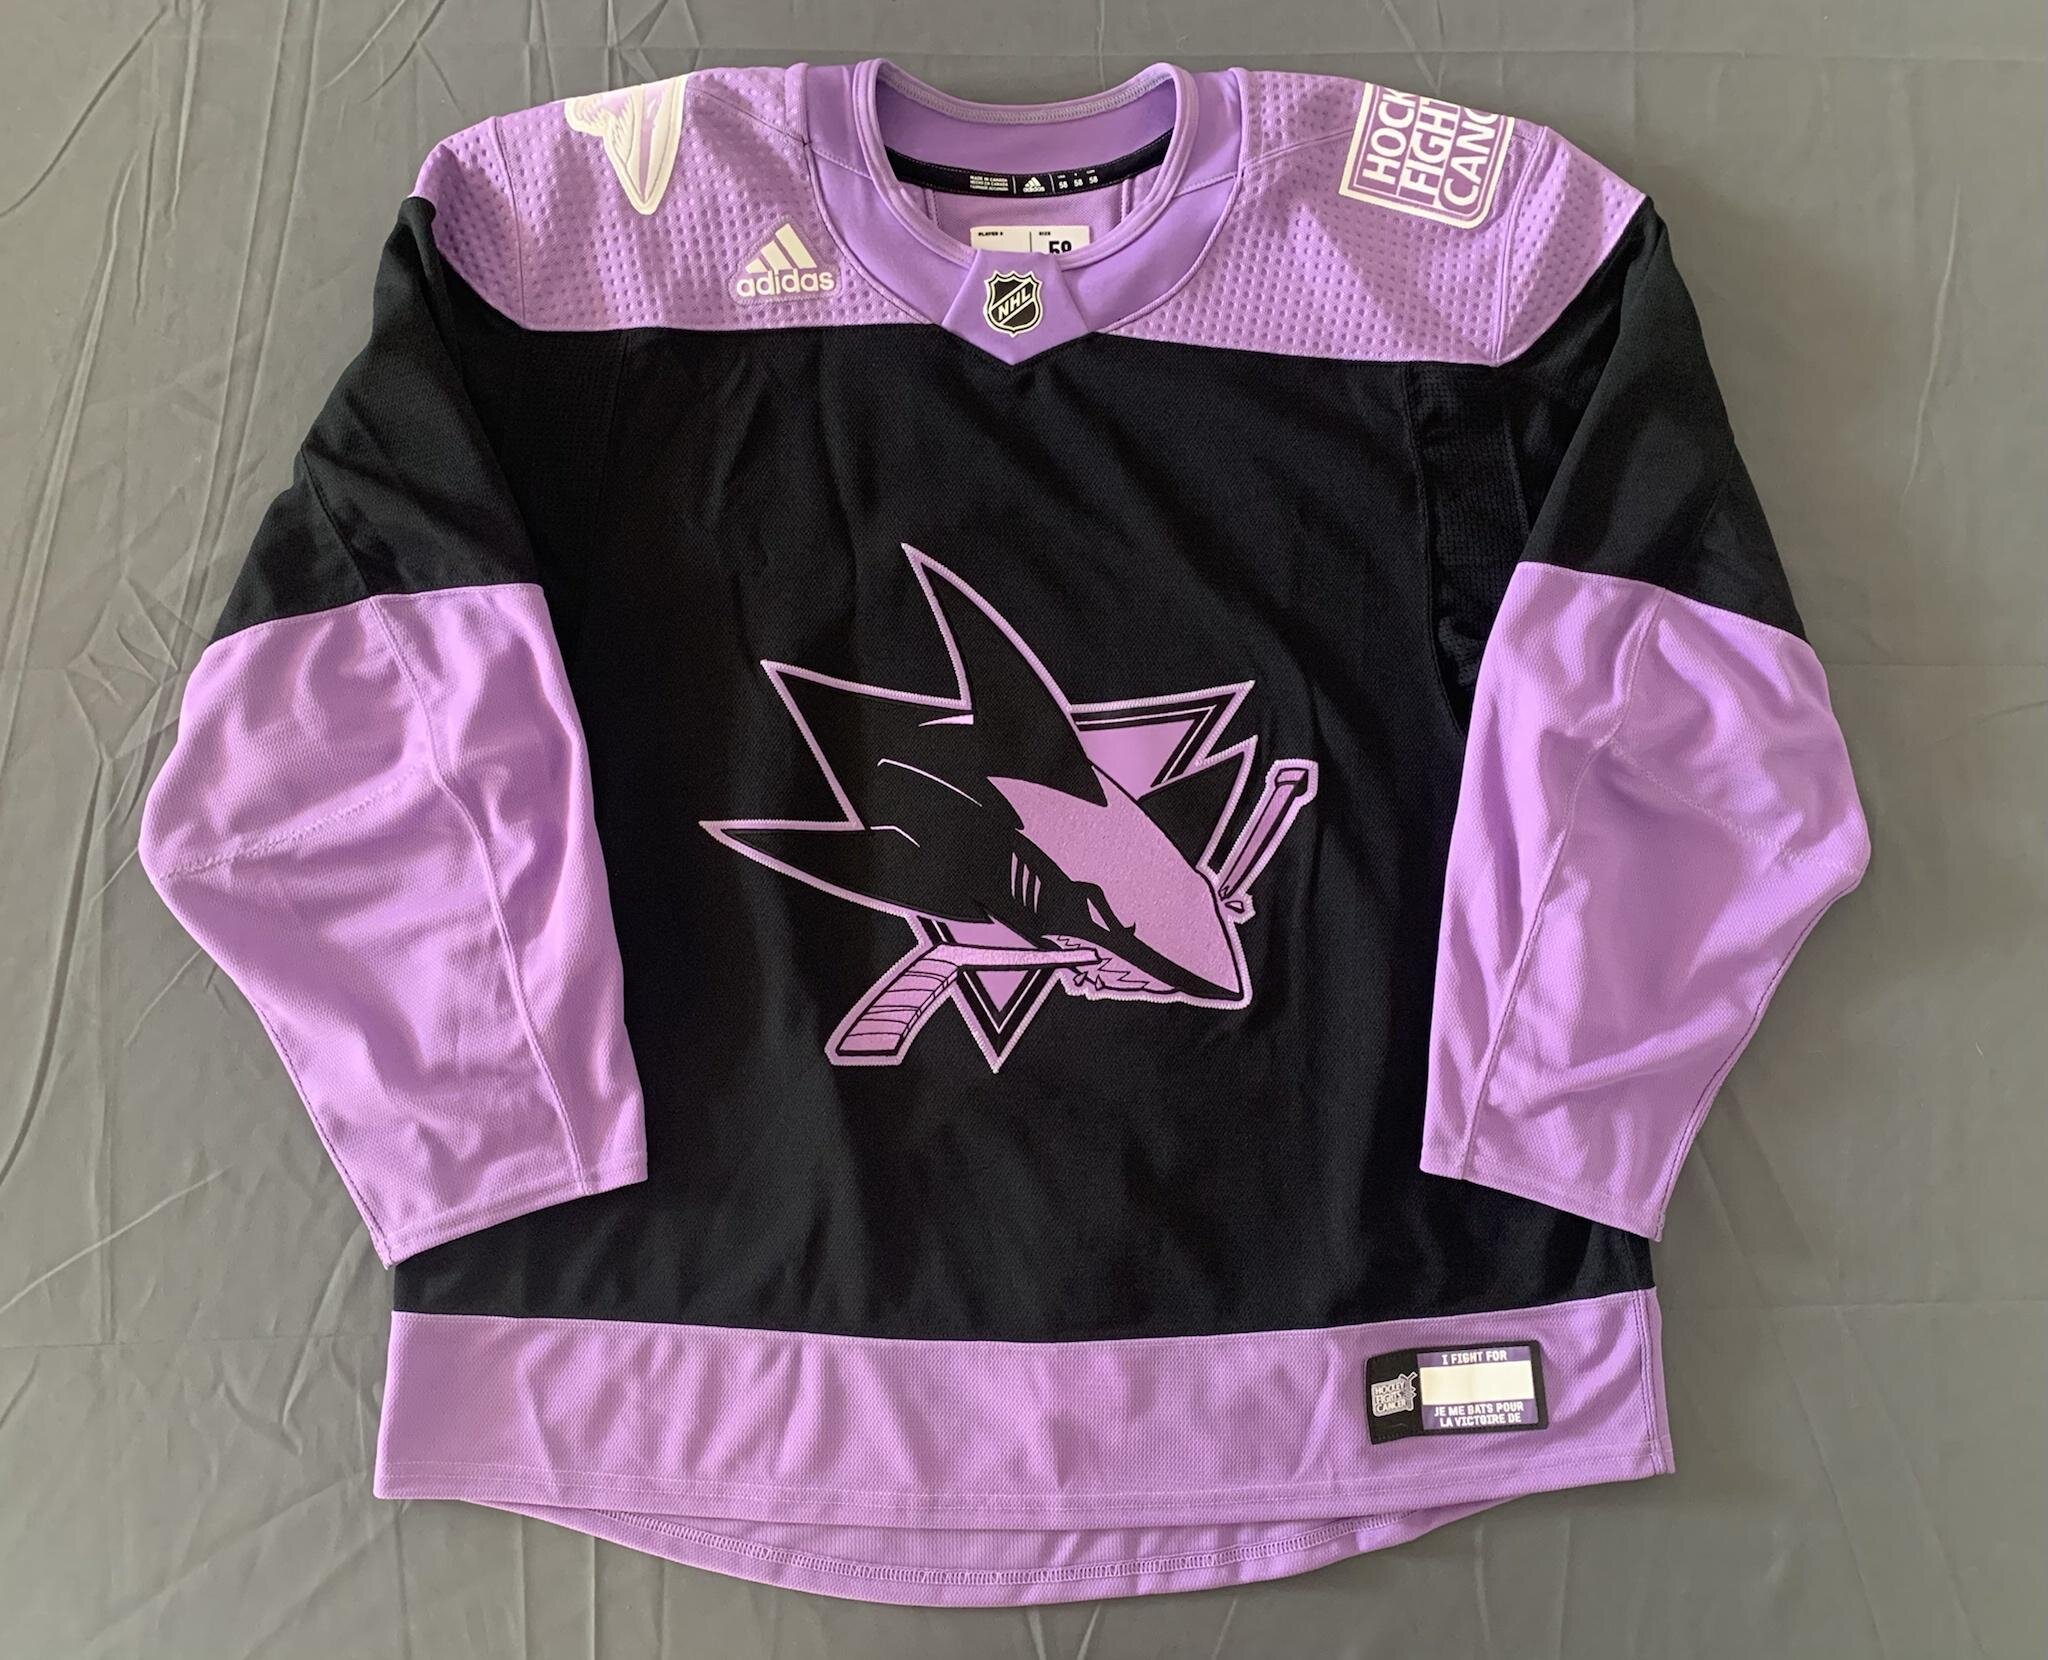 San Jose Sharks Practice-Used White Jersey from the 2019-20 NHL Season